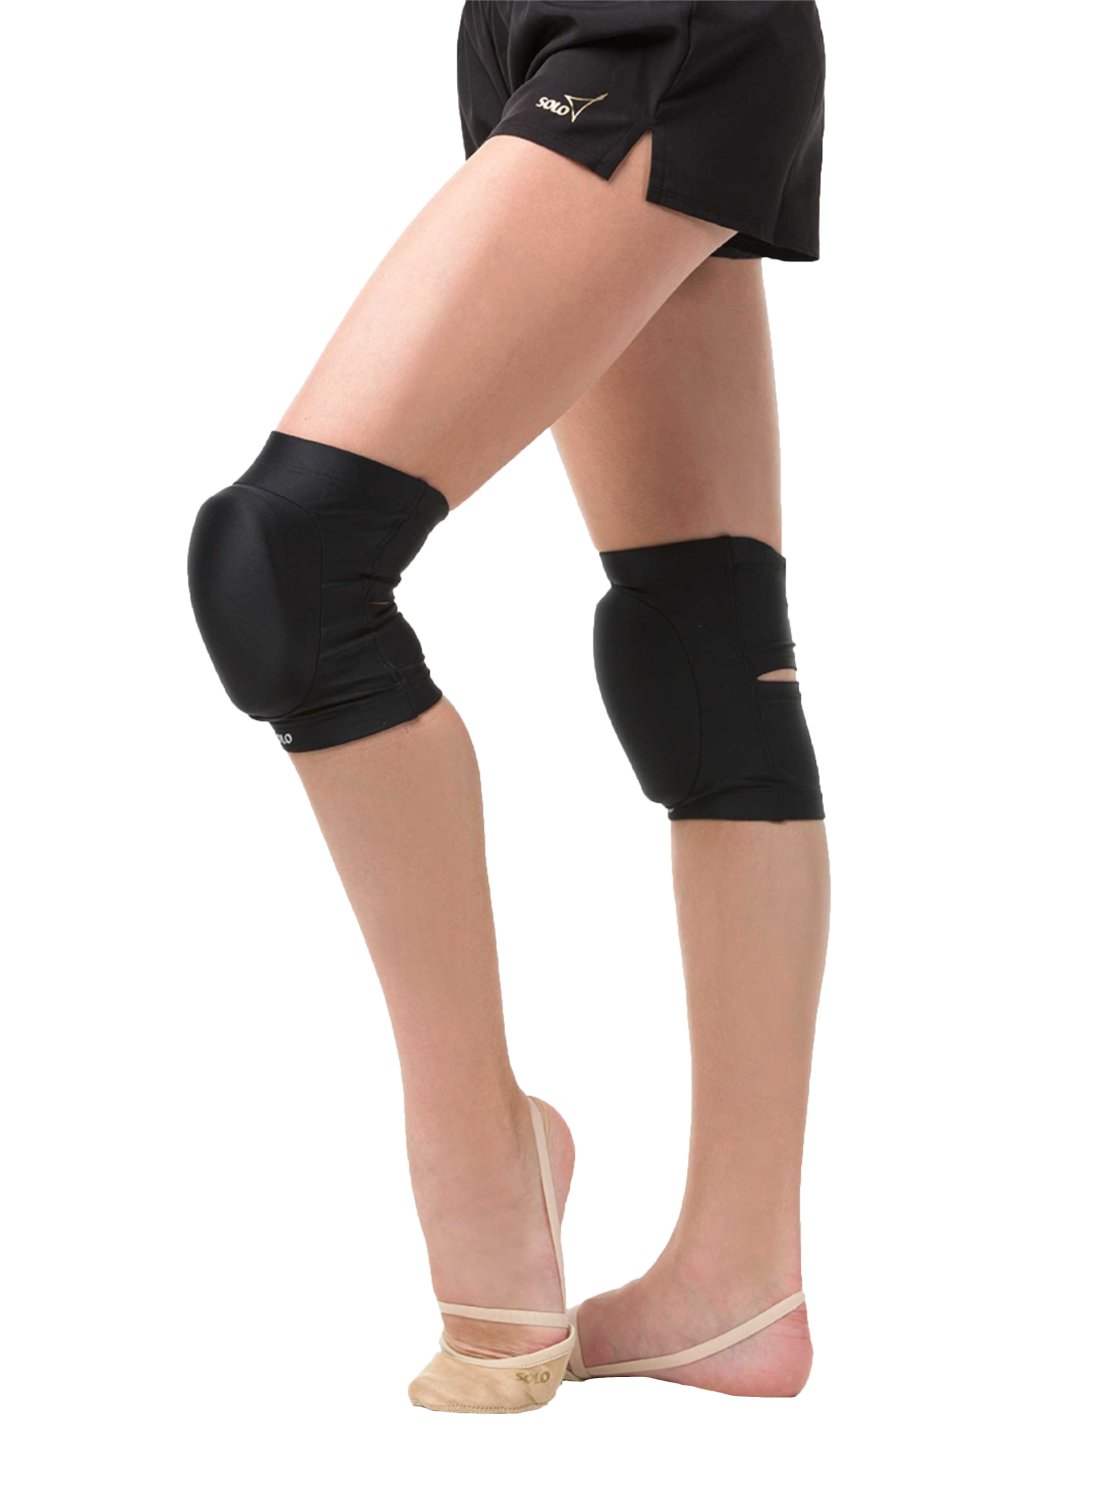  Molded knee pads